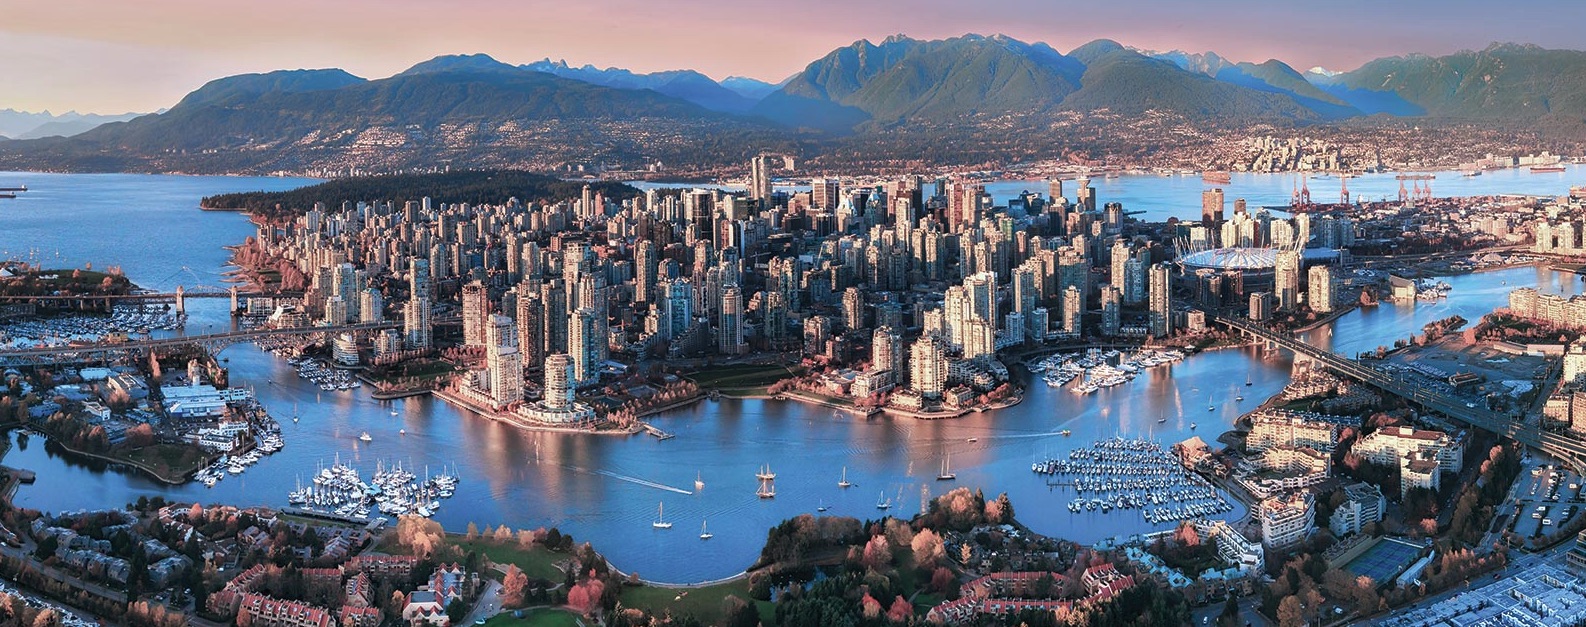 Vancouver's beauty, journal of wild culture, ©2020